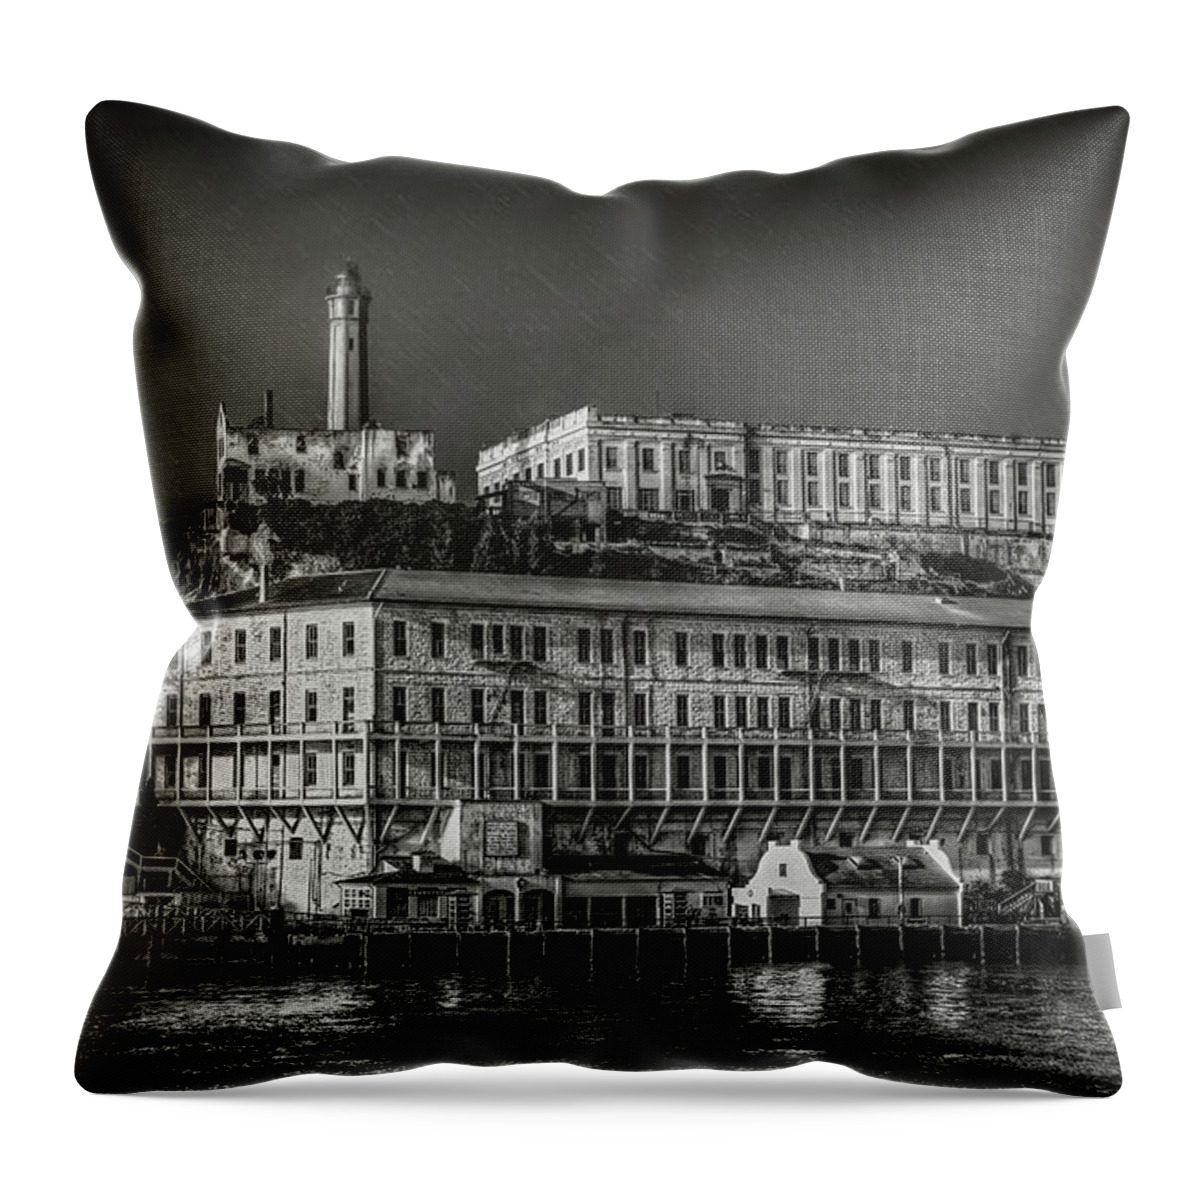 San Francisco California Throw Pillow featuring the photograph Approaching Alcatraz Island in Black and White by Jennifer Rondinelli Reilly - Fine Art Photography